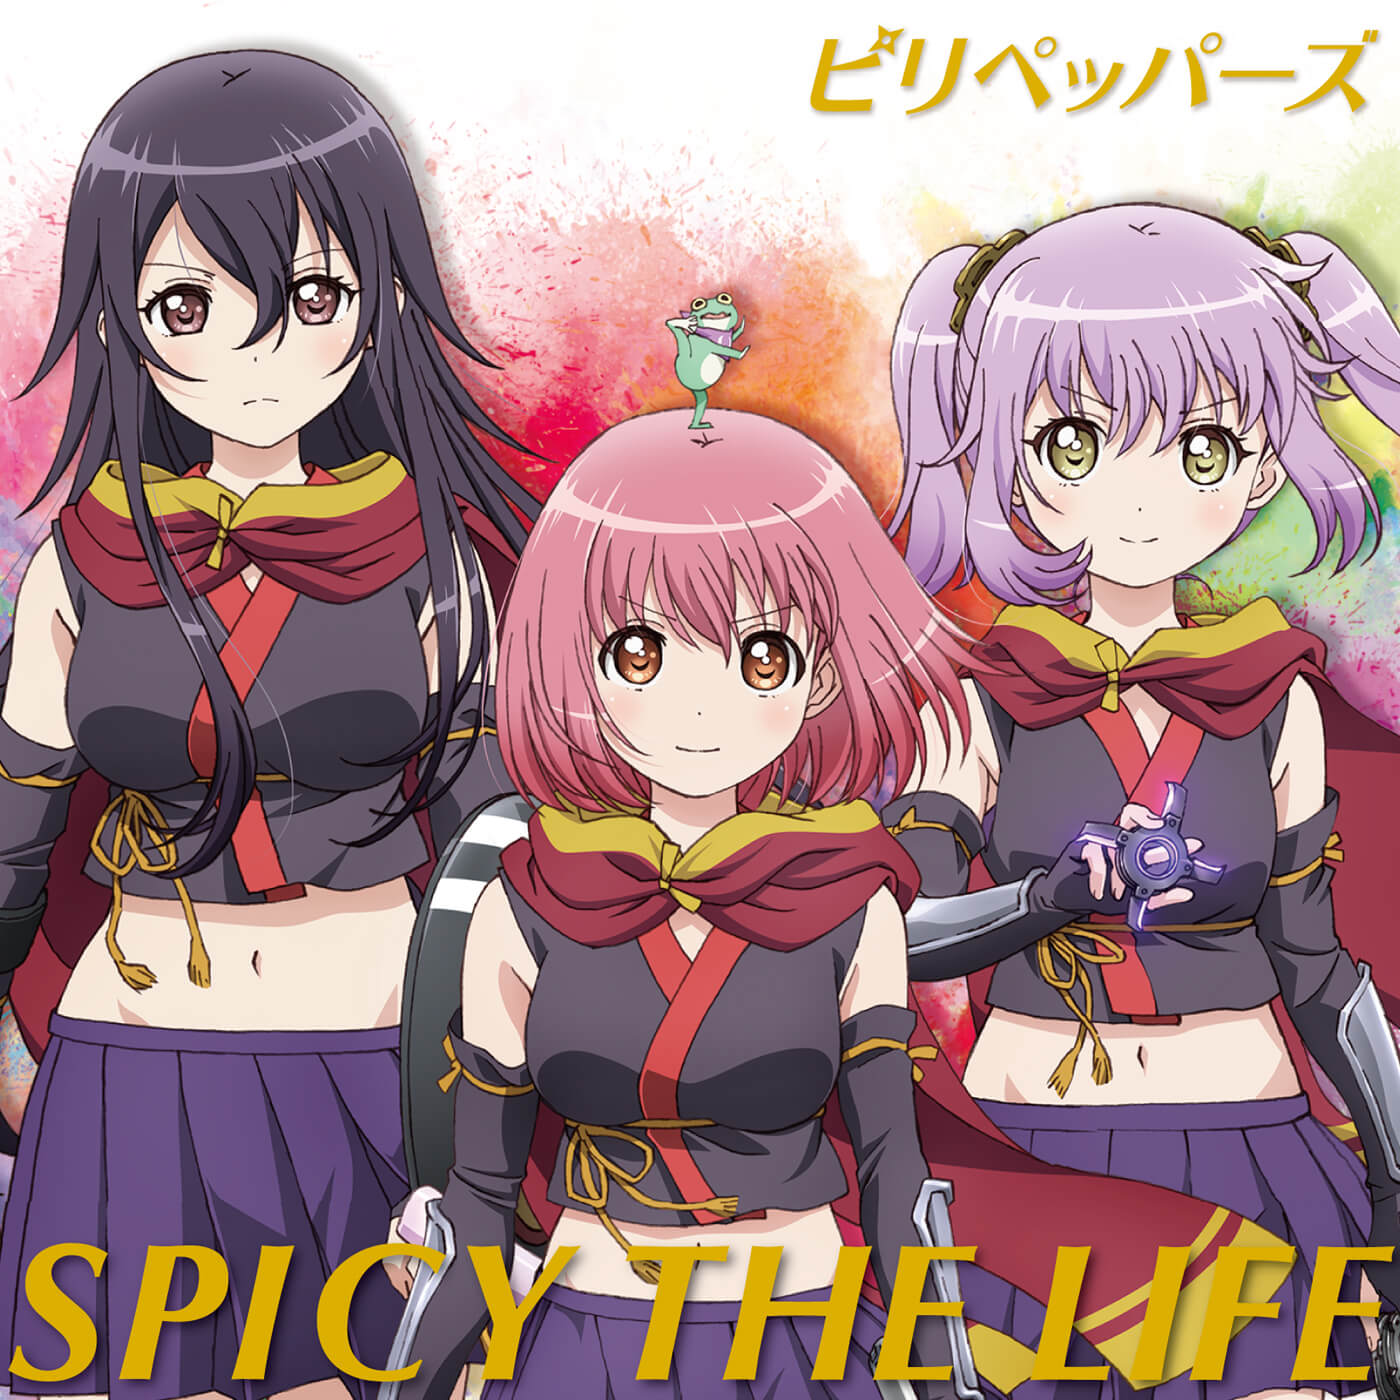 RELEASE THE SPYCE_0521